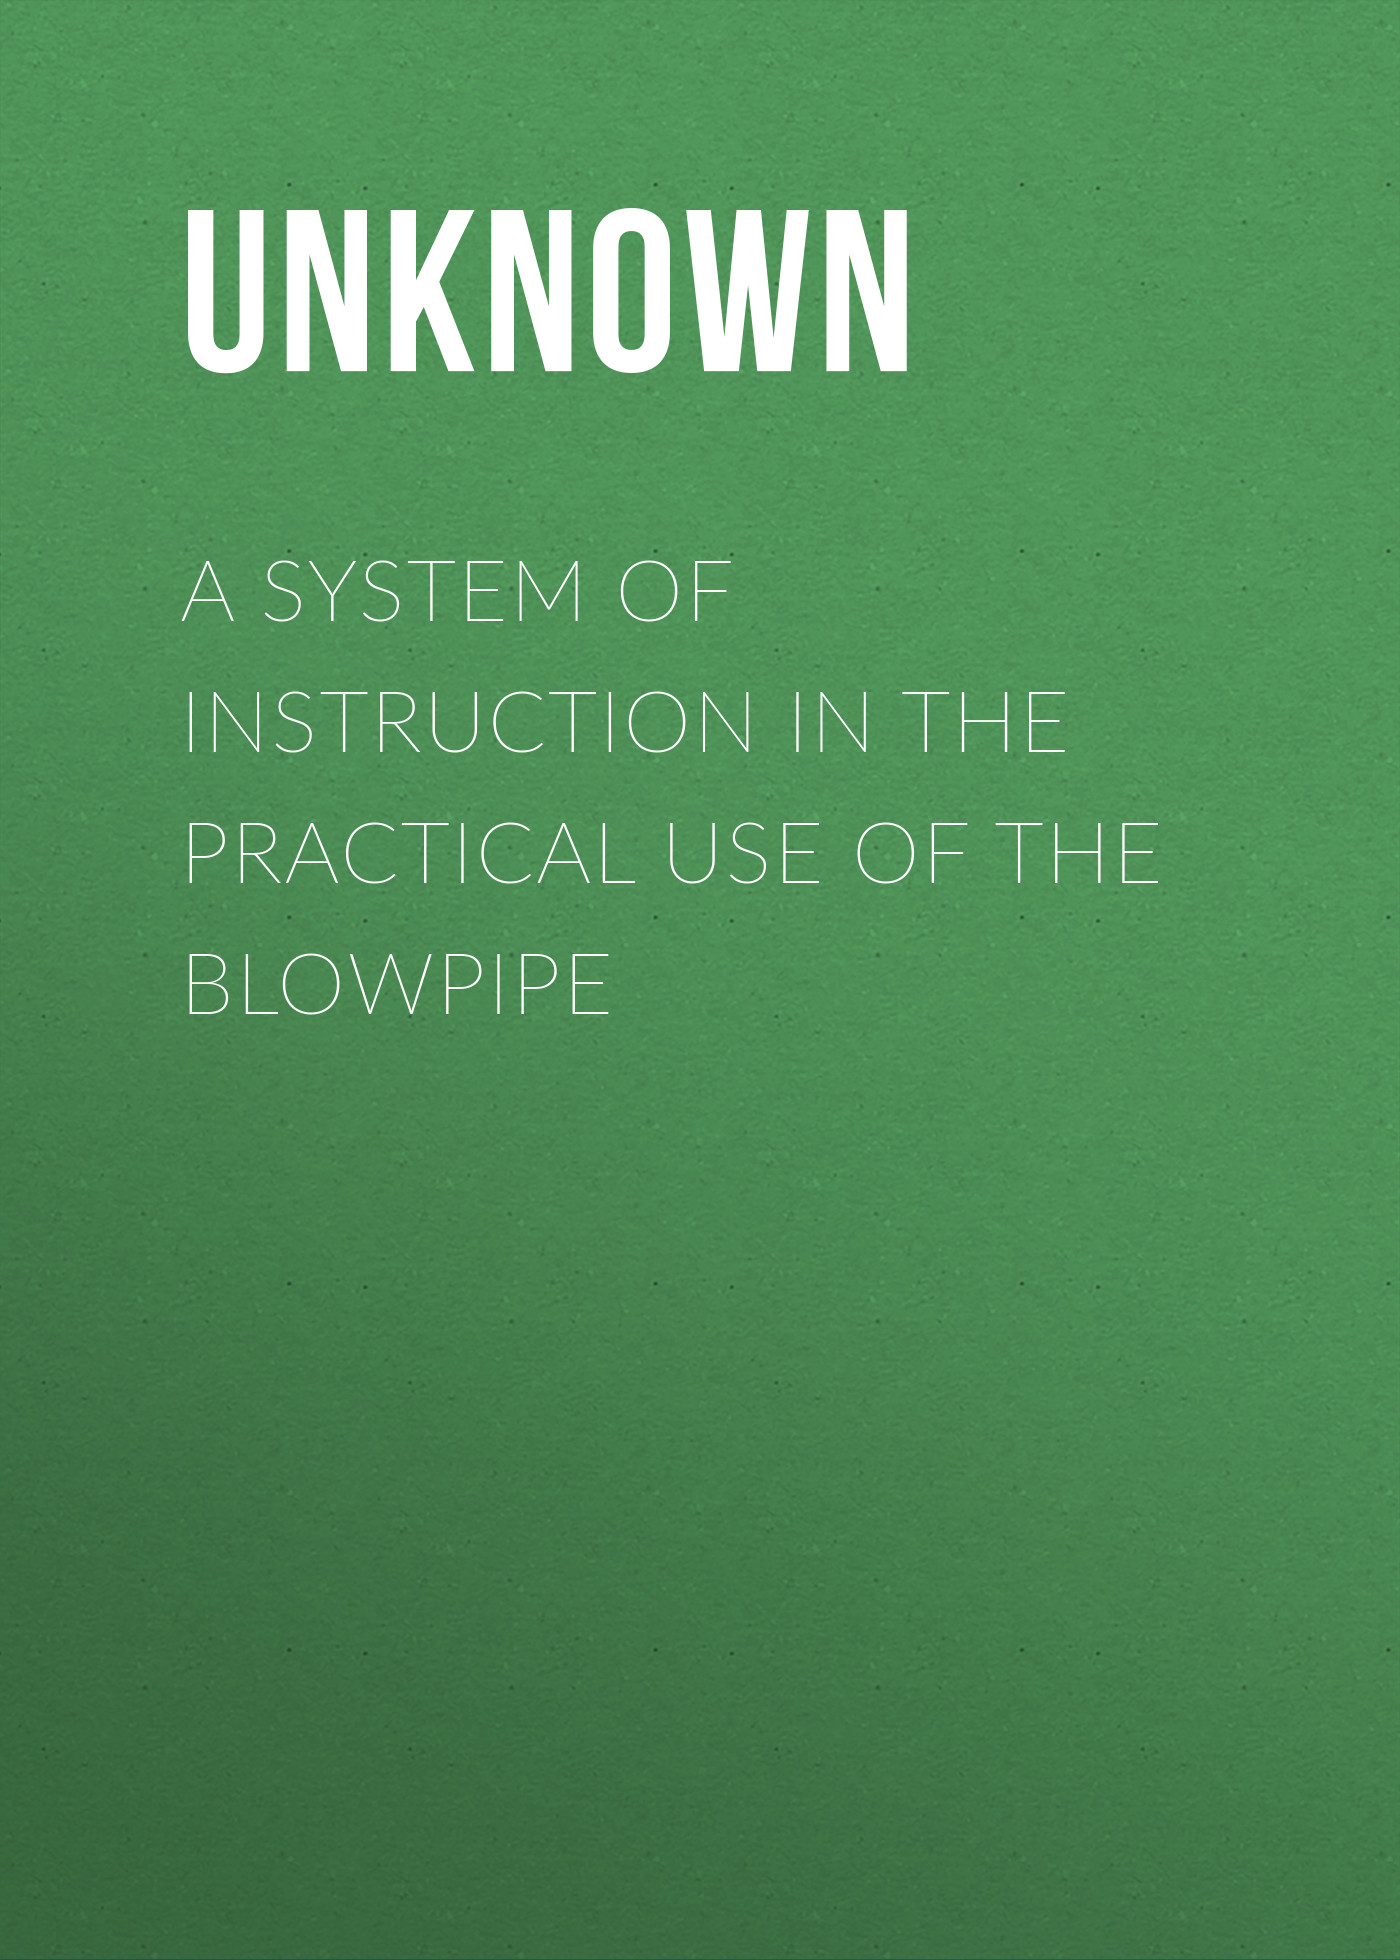 Unknown A System of Instruction in the Practical Use of the Blowpipe